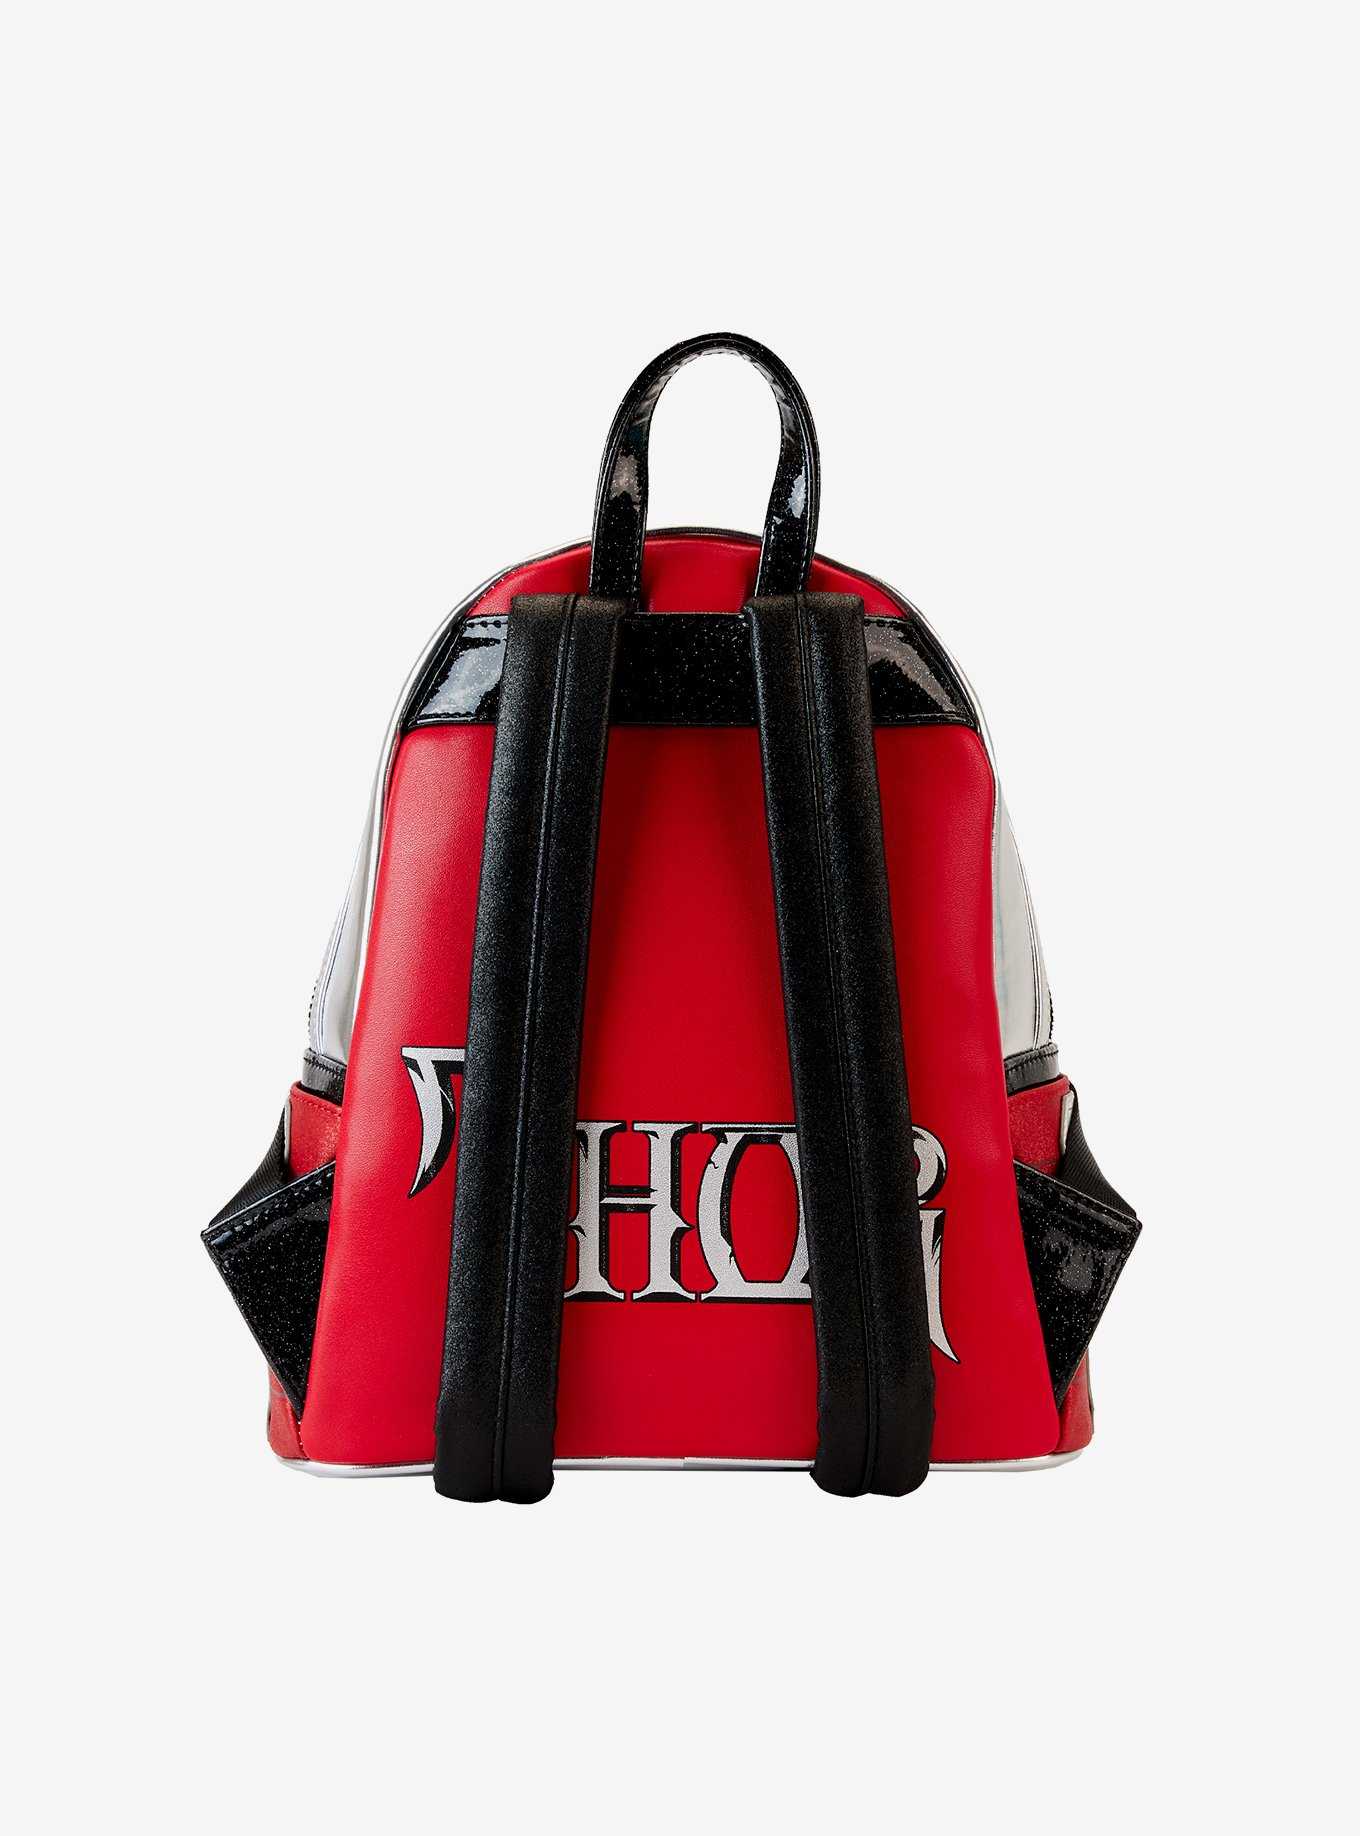 Loungefly Marvel Thor Metallic Suit Mini Backpack, , hi-res